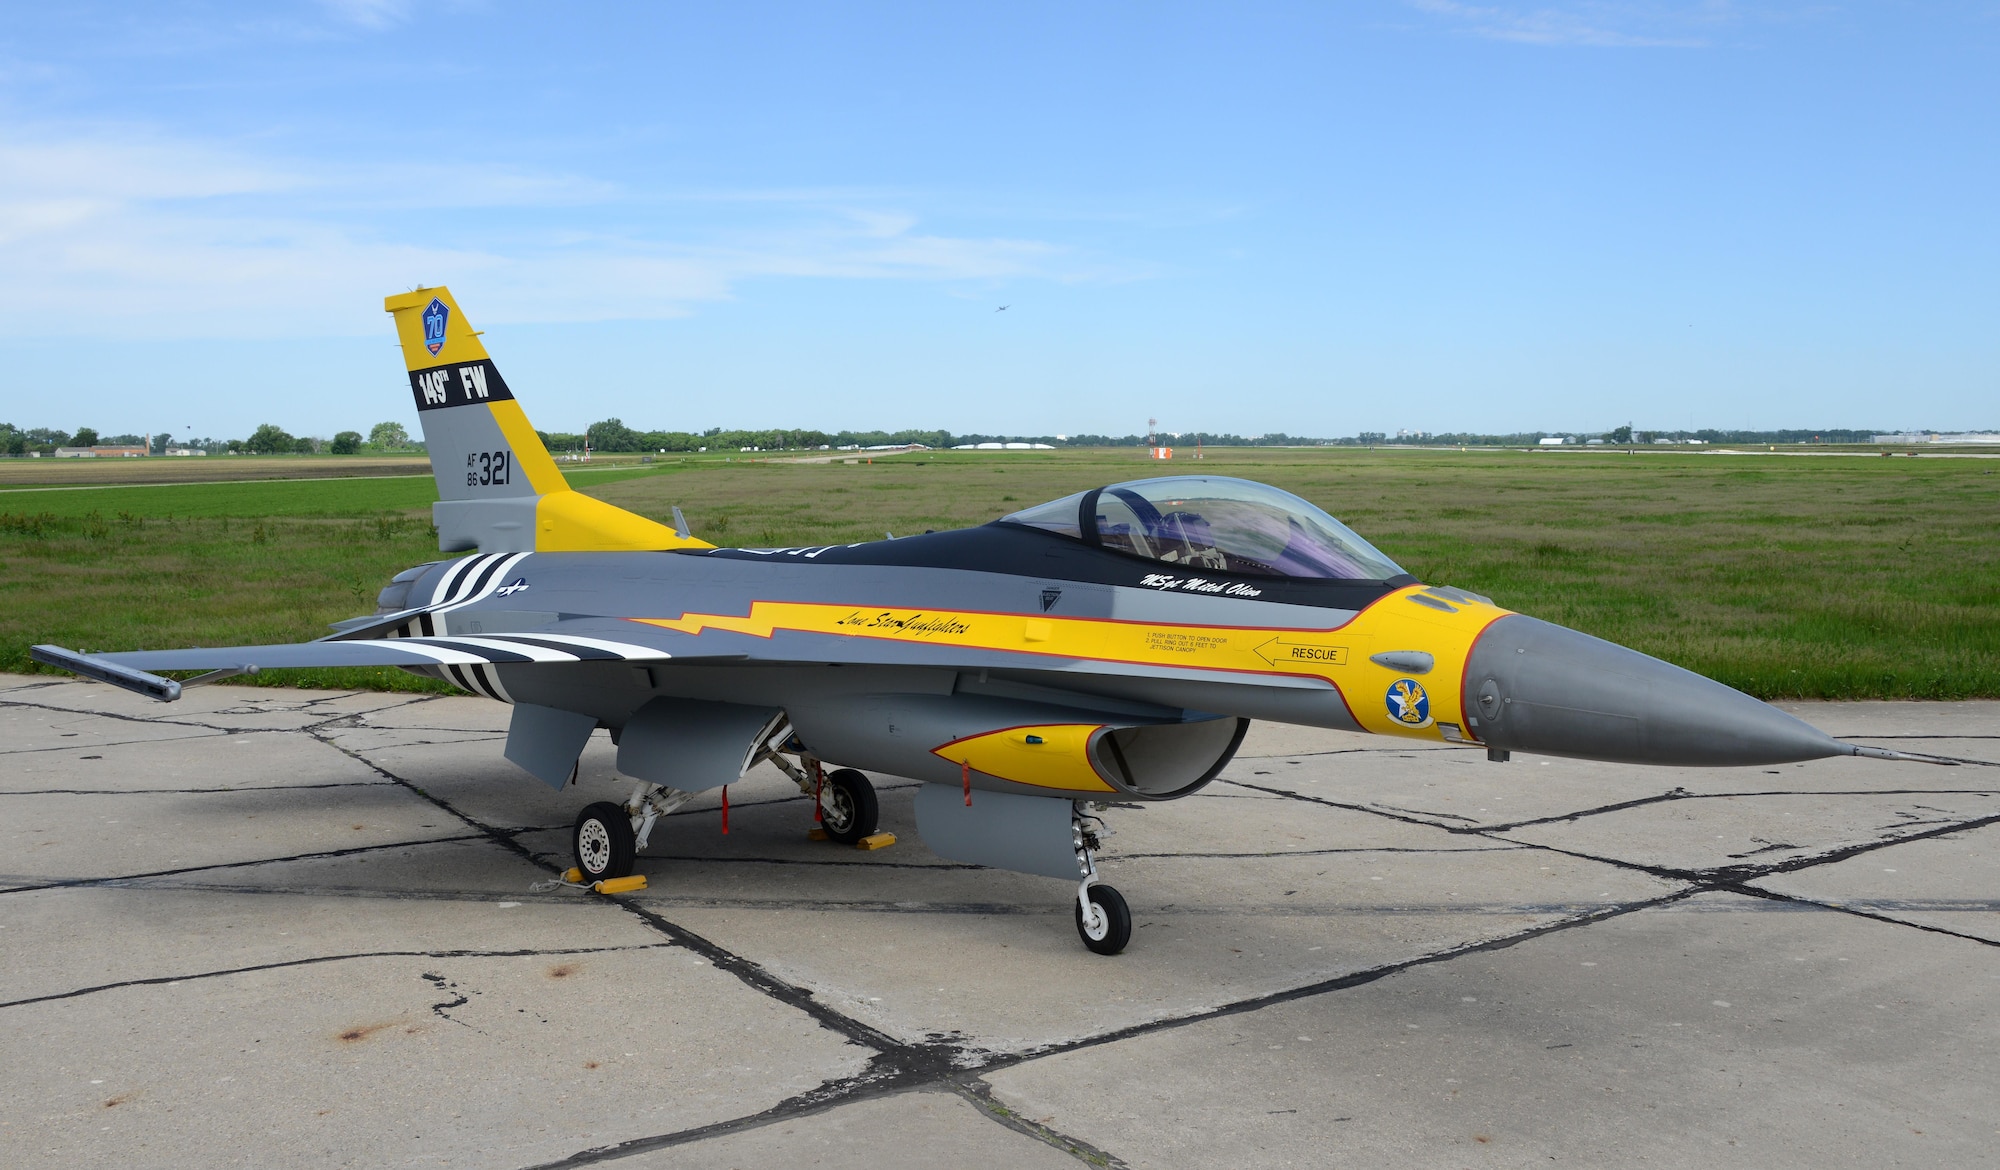 A U.S. Air Force F-16 assigned to the 149th Fighter Wing, Texas Air National Guard, painted with World War II heritage markings is parked outside the Air National Guard Paint Facility in Sioux City, Iowa on May 26, 2017. The 149th FW received authorization for the nonstandard markings in order to commemorate the United States Air Force 70th Anniversary. The markings represent the lineage of the 149th FW with the unit’s origins dating back to the 396th Fighter Squadron “Thunder Bums” P-47 paint scheme from 1944. 
U.S. Air National Guard Photo by: Master Sgt. Vincent De Groot 185th ARW PA/Released